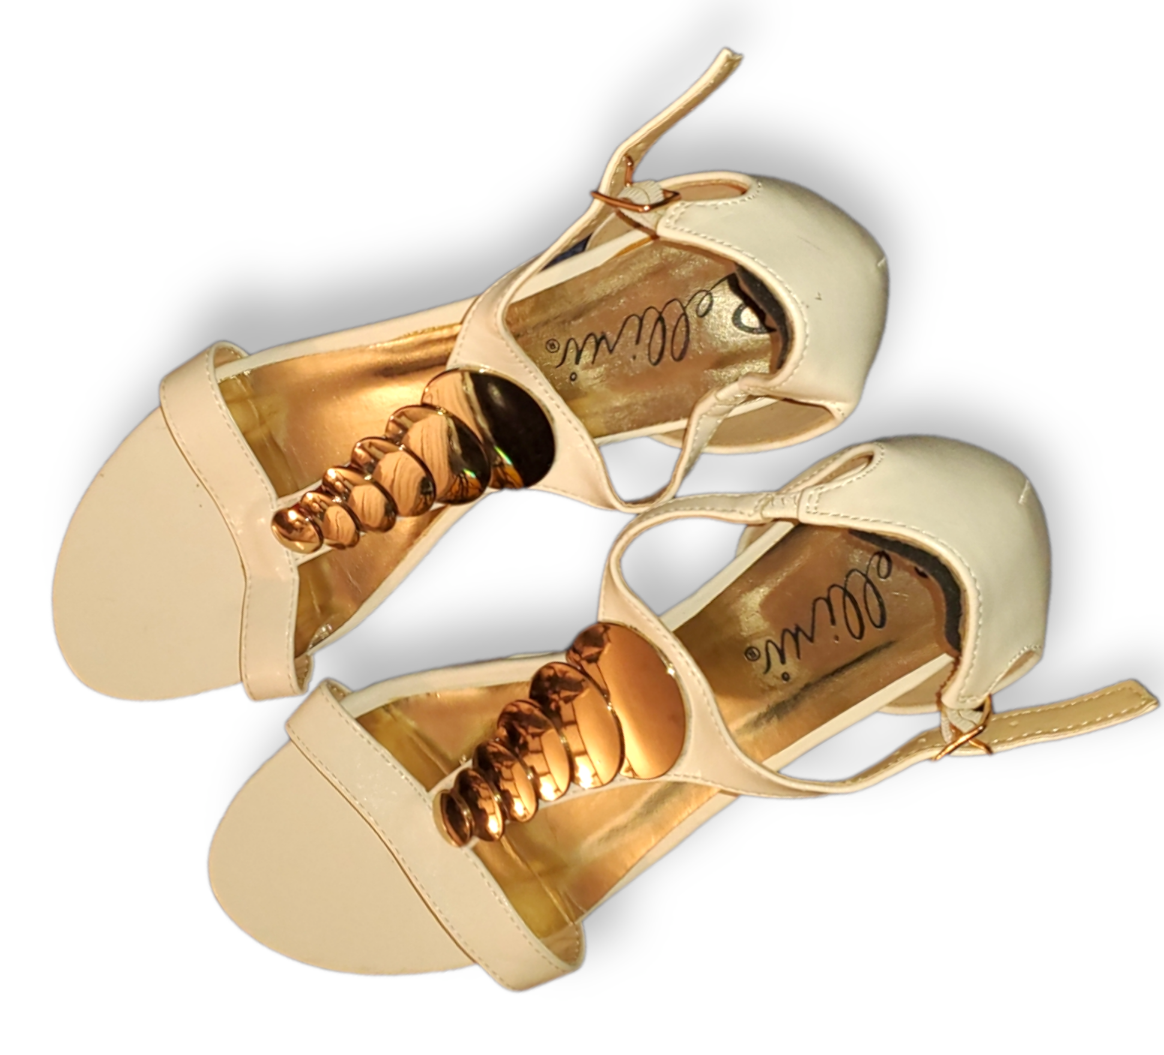 White Sandals With Gold Metal Detail|Used